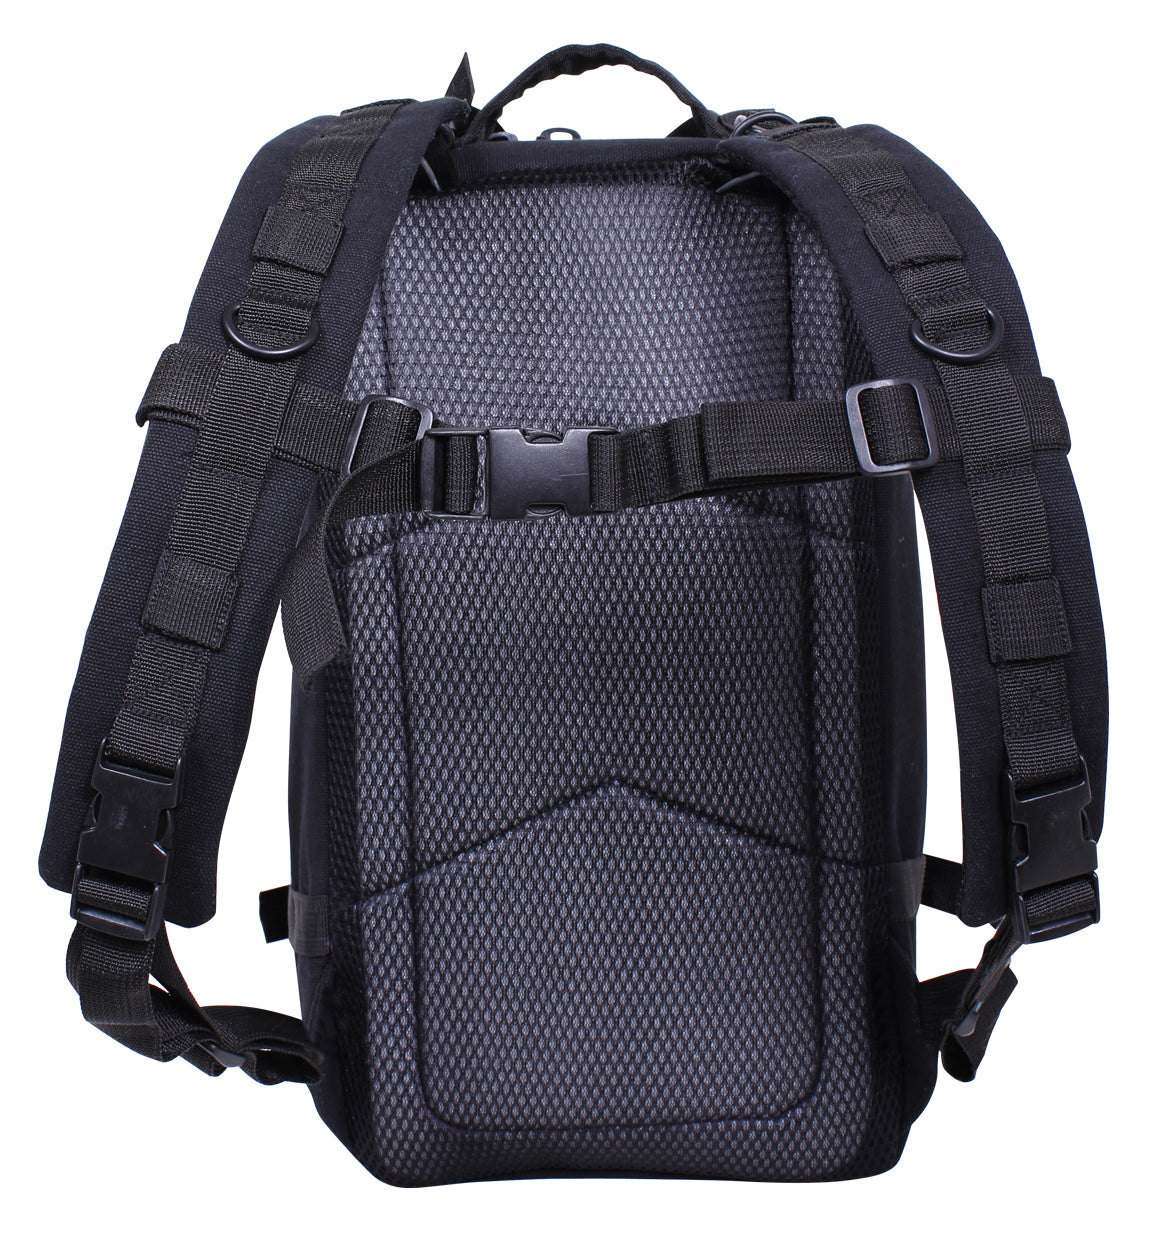 Tactical canvas Go Pack